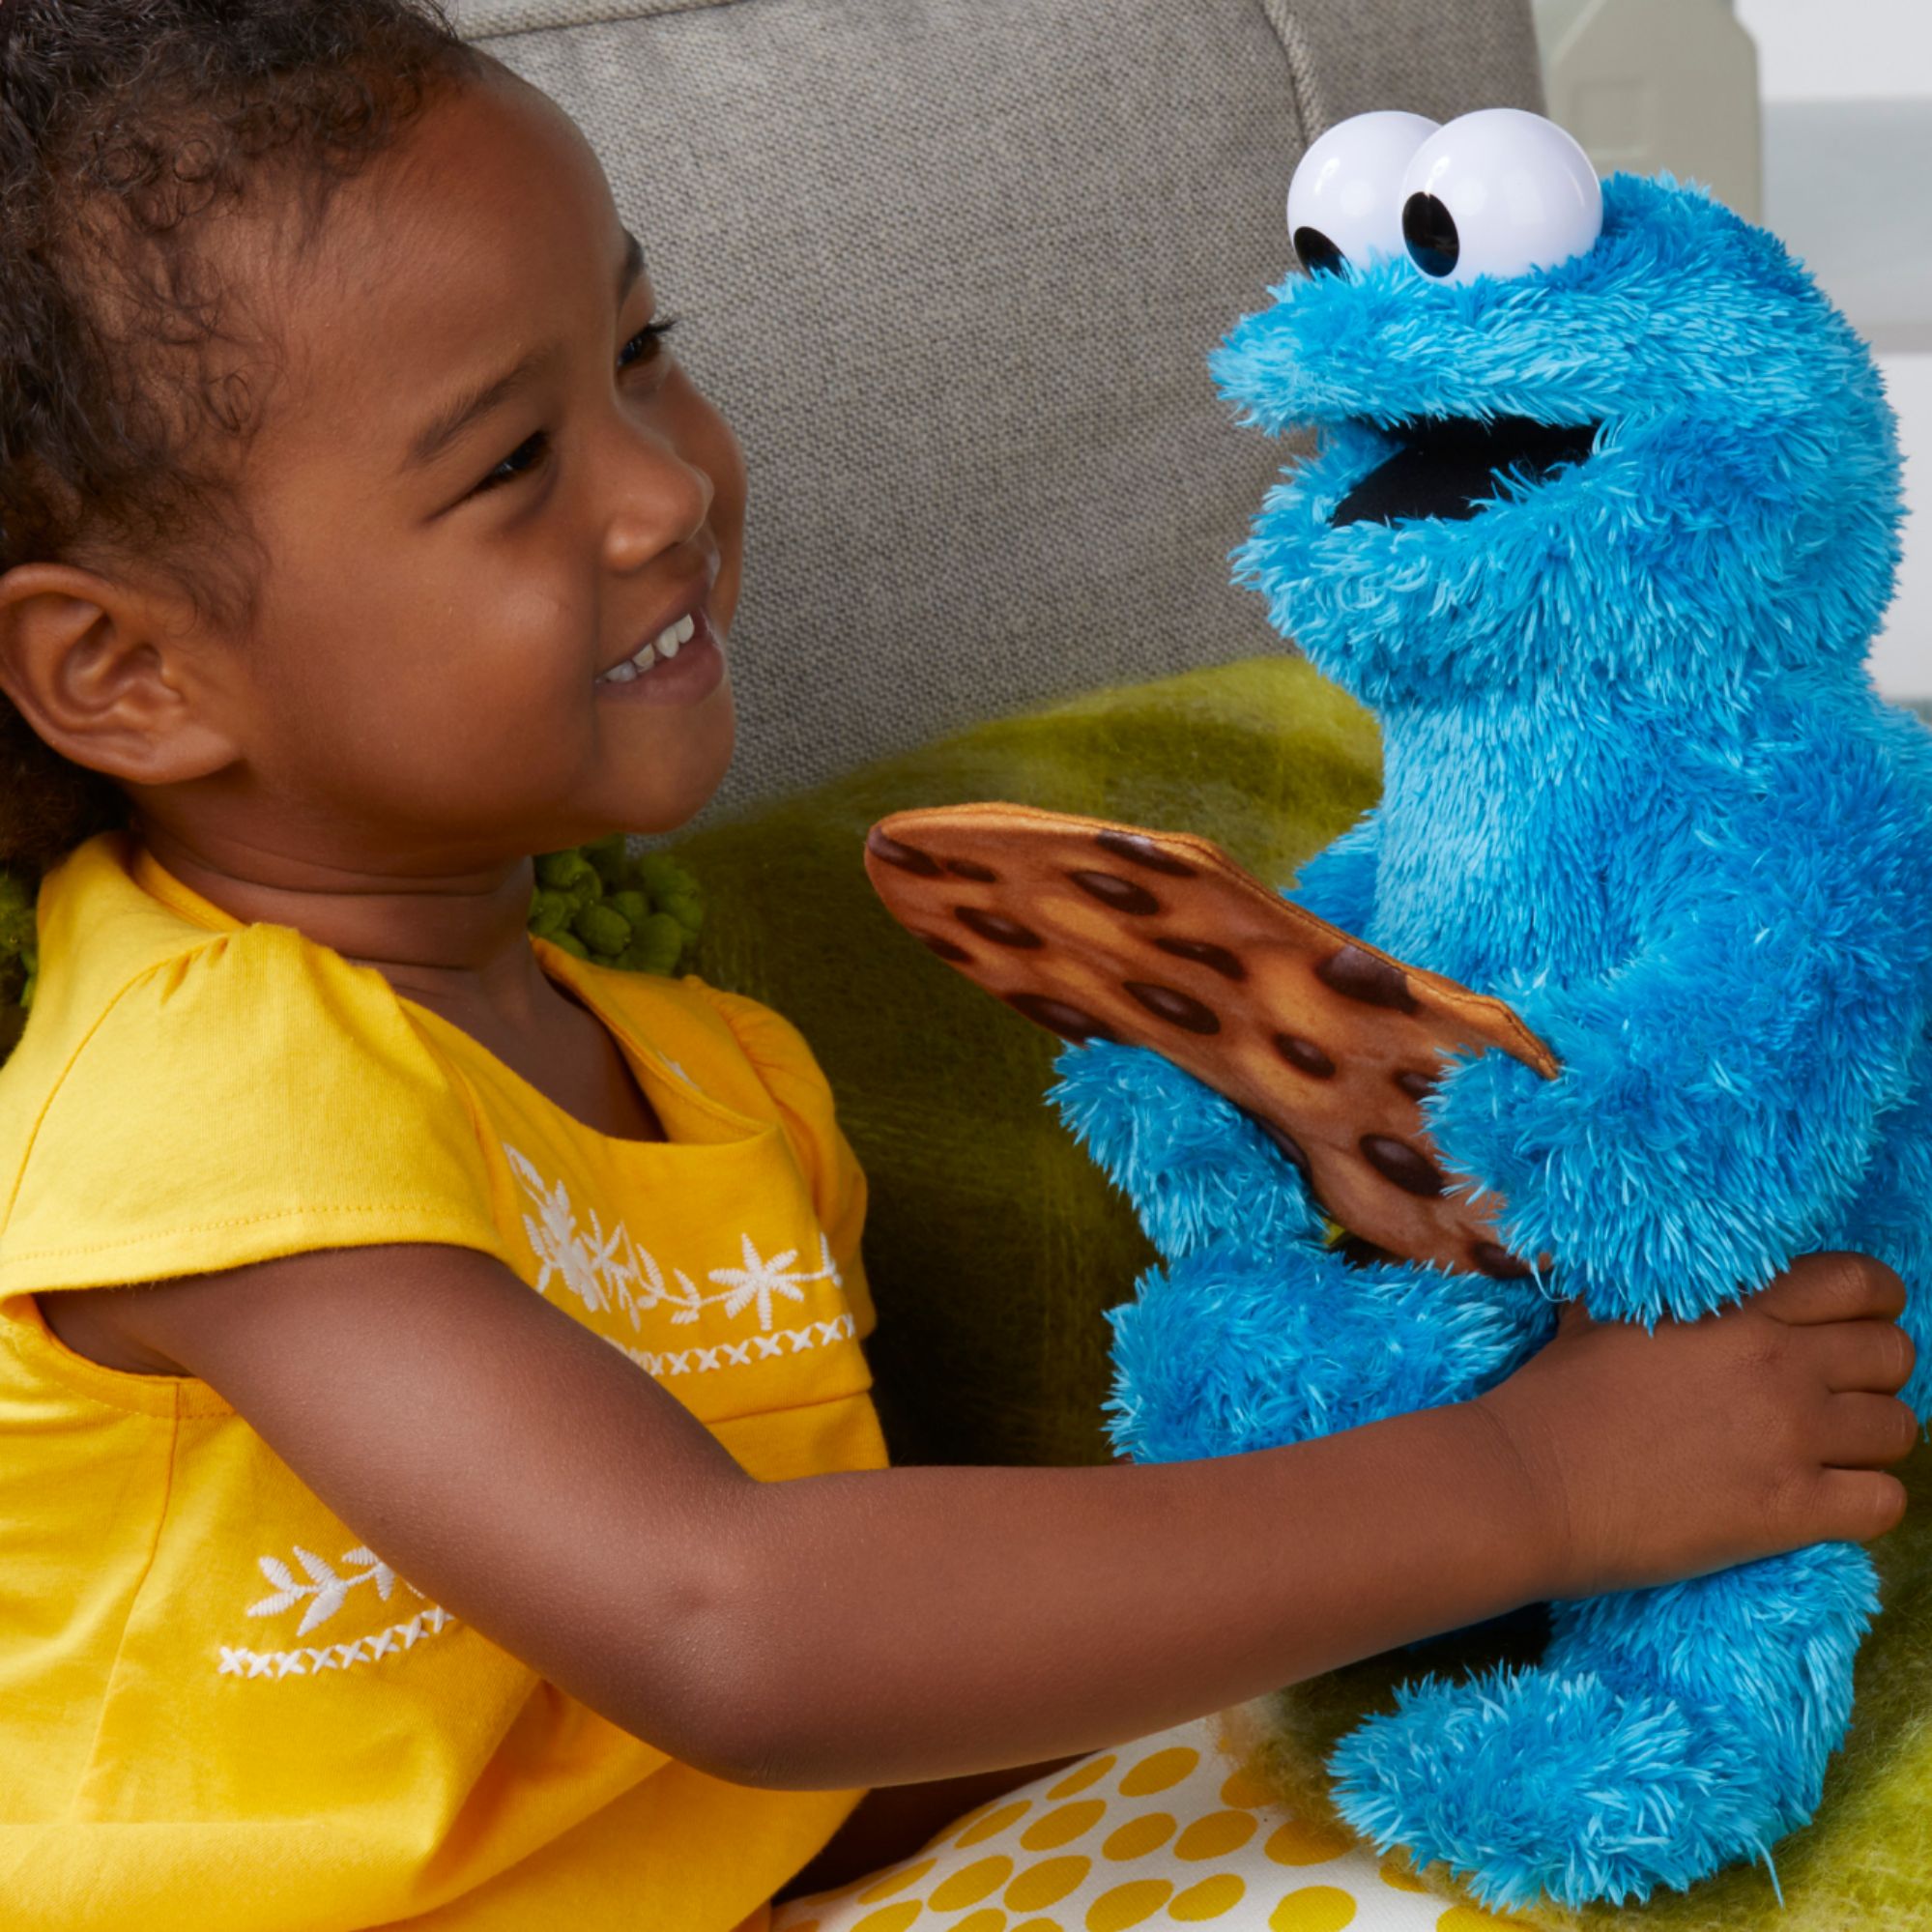 Sesame Street Squeeze A Song Cookie Monster